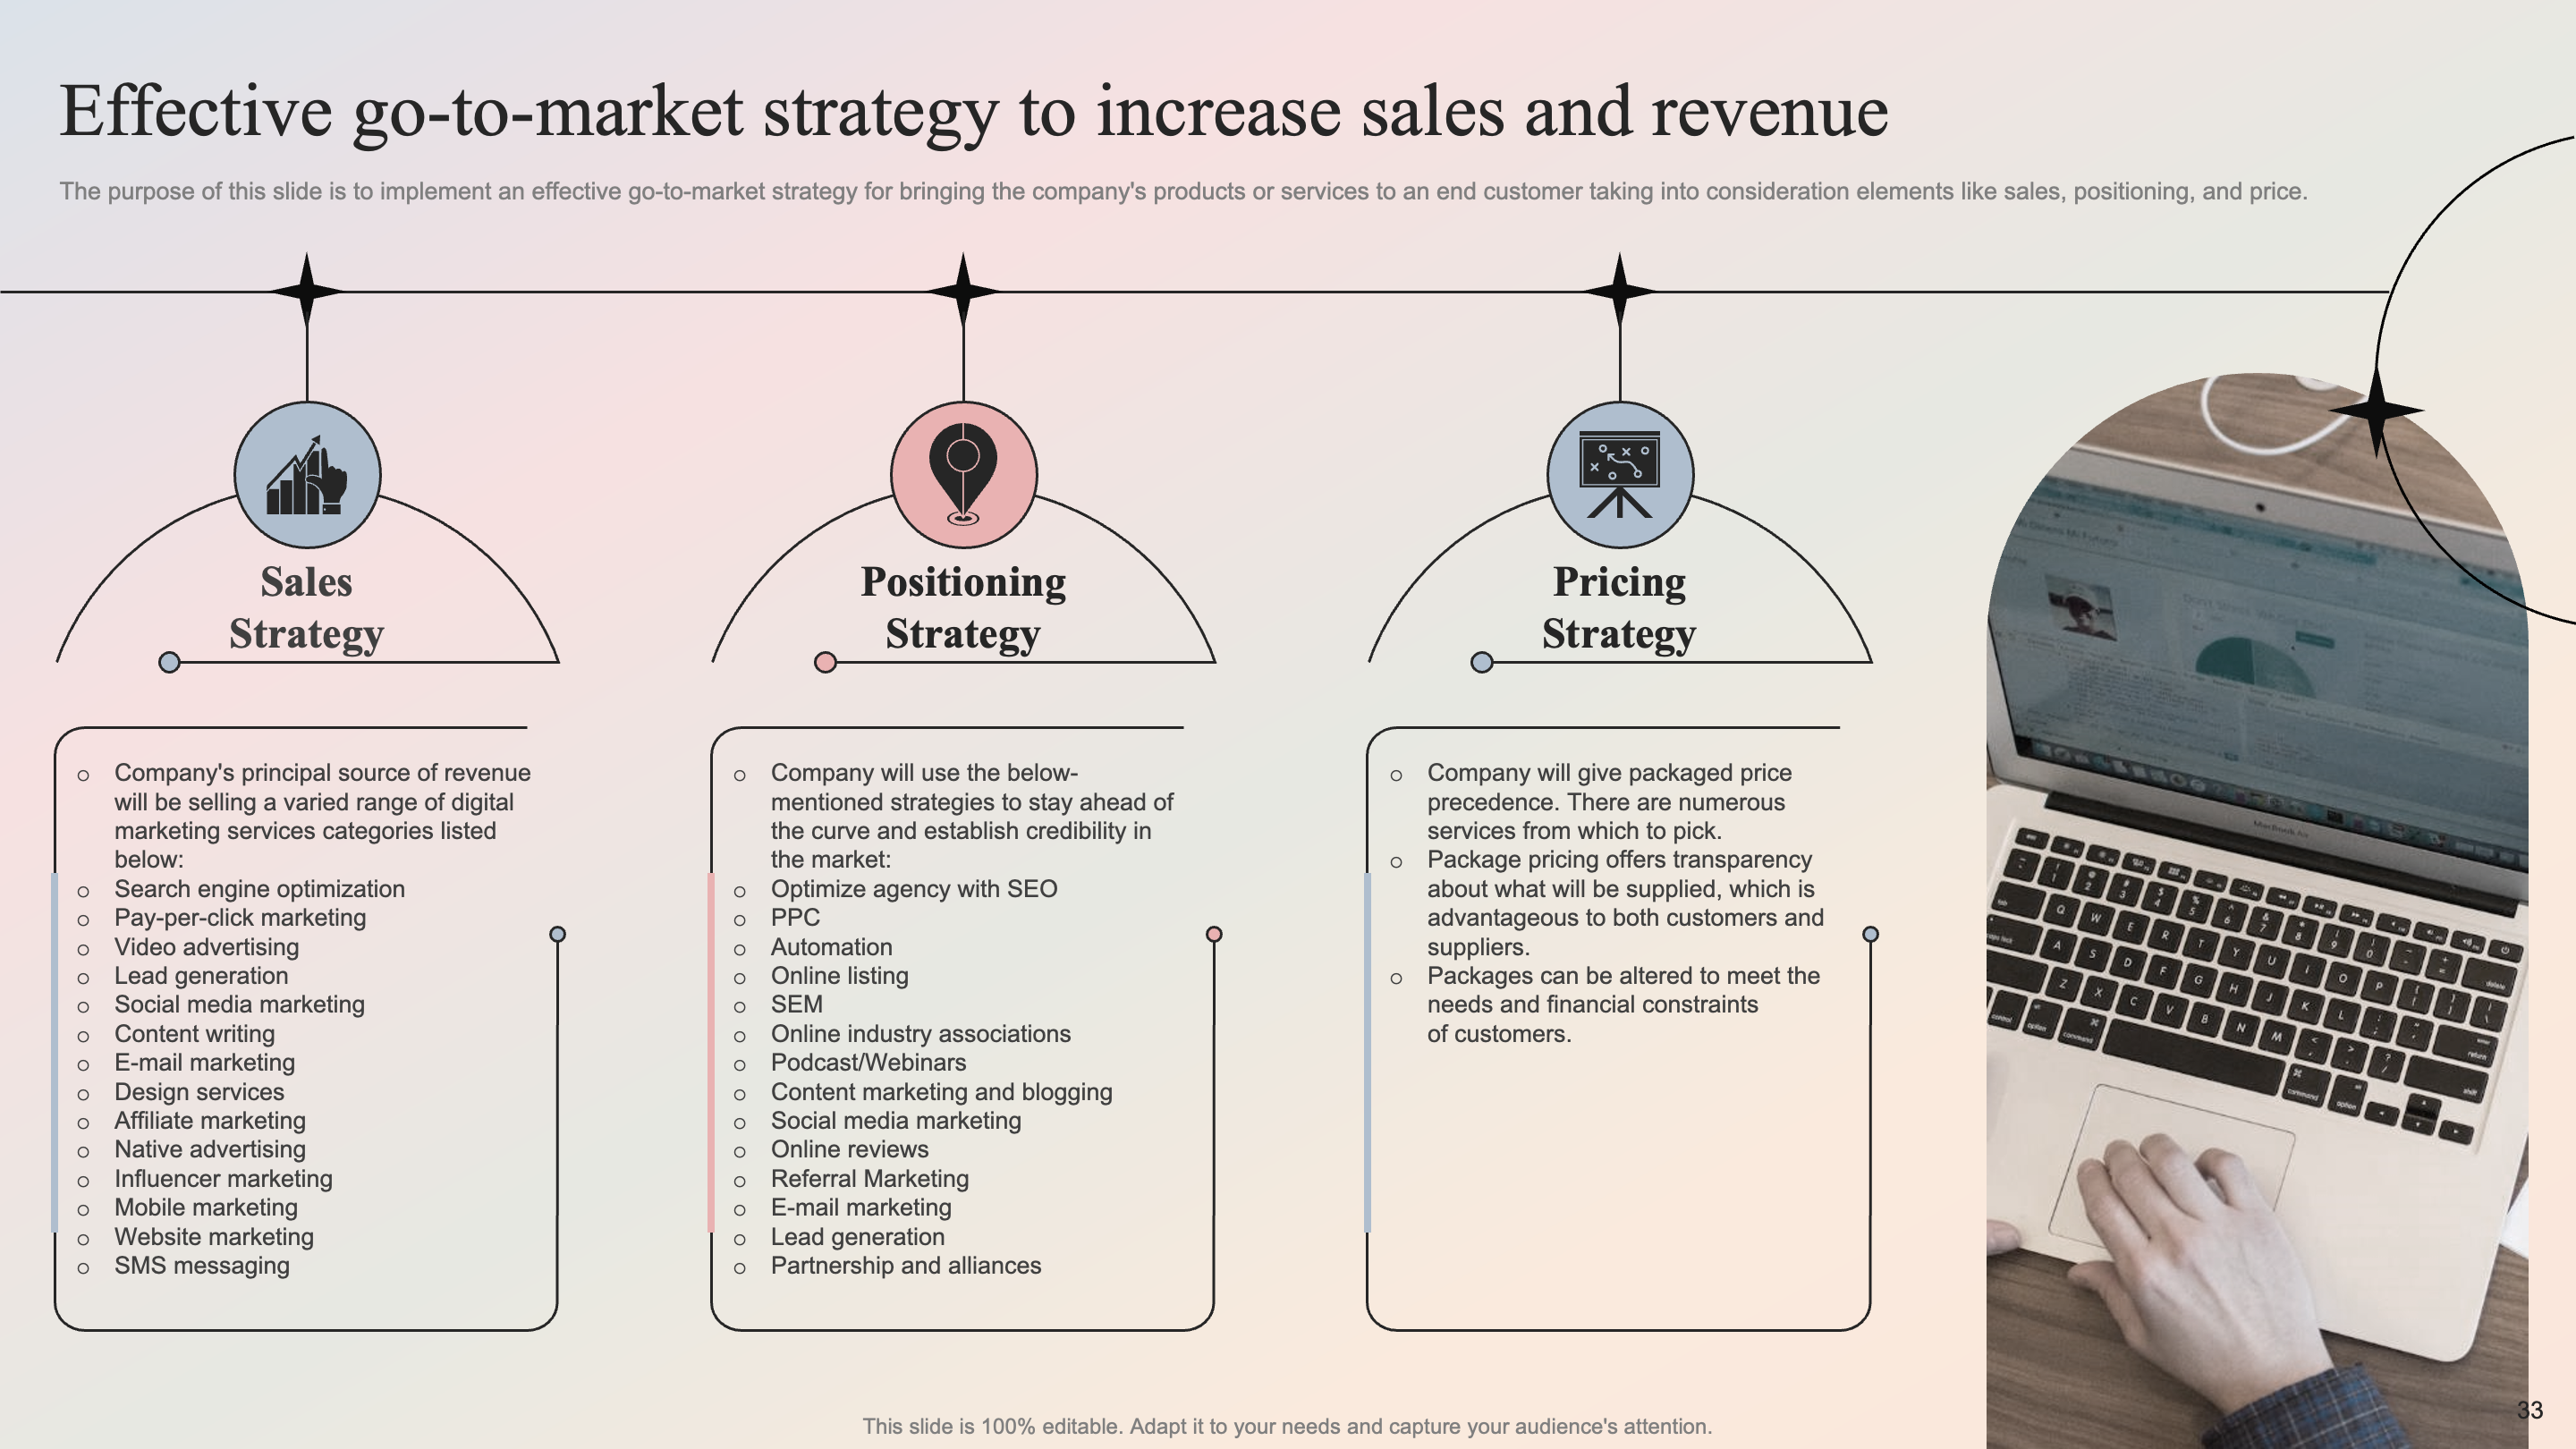 Effective Go-to-Market Strategy to Increase Sales and Revenue 